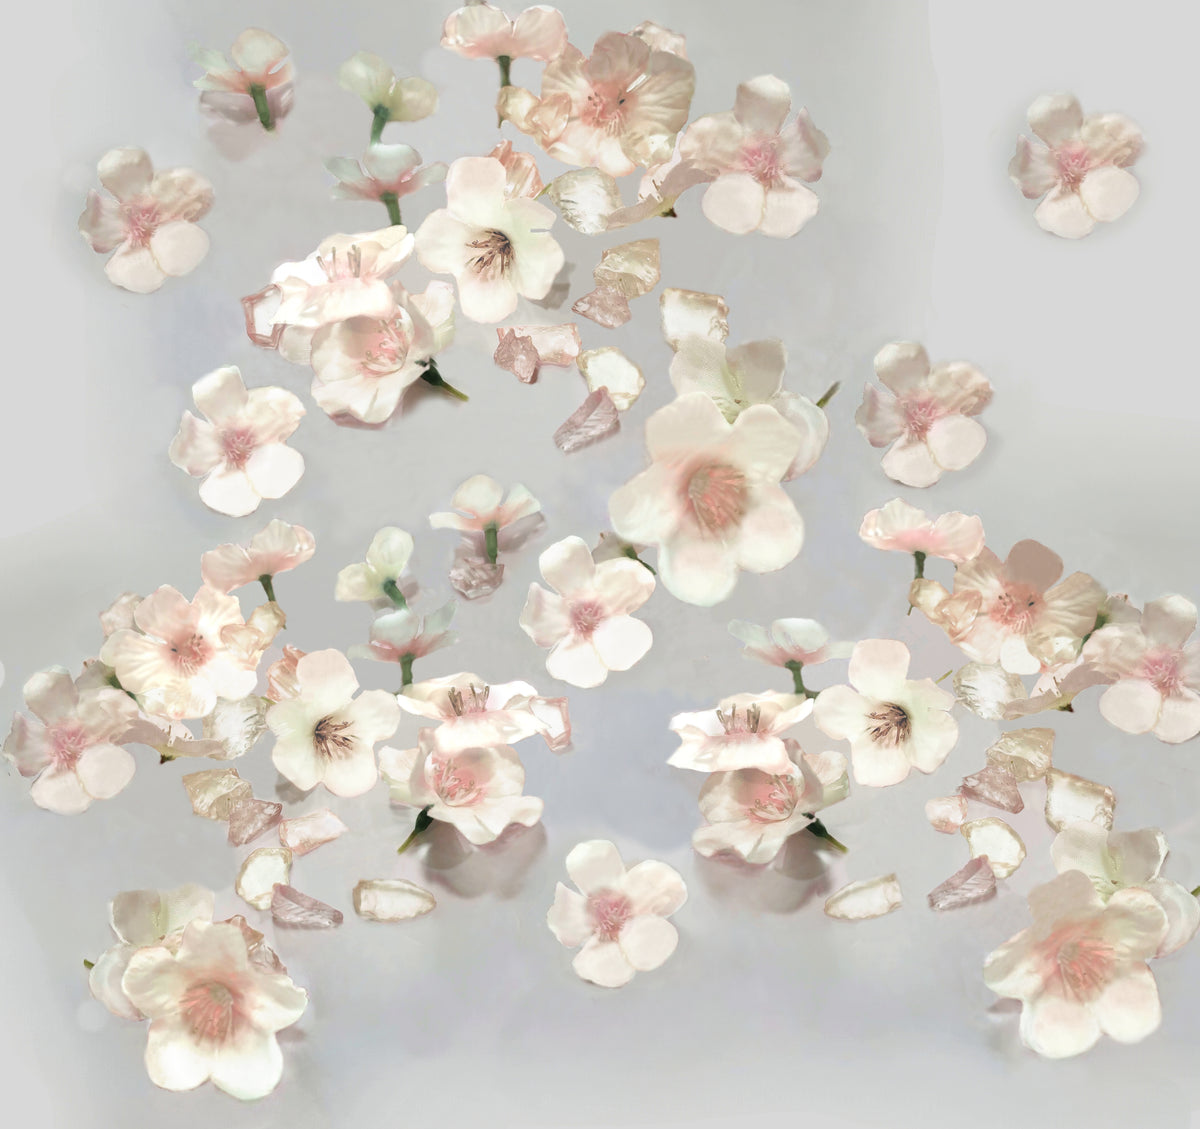 60 Floating White/Off White/Pink Cherry Blossoms Flowers with Matching Chipped Glass or Pearls-Fills 1 Gallon for Your vases-With Measured Floating Kit-Option:3 Submersible Fairy Lights-Vase Decorations